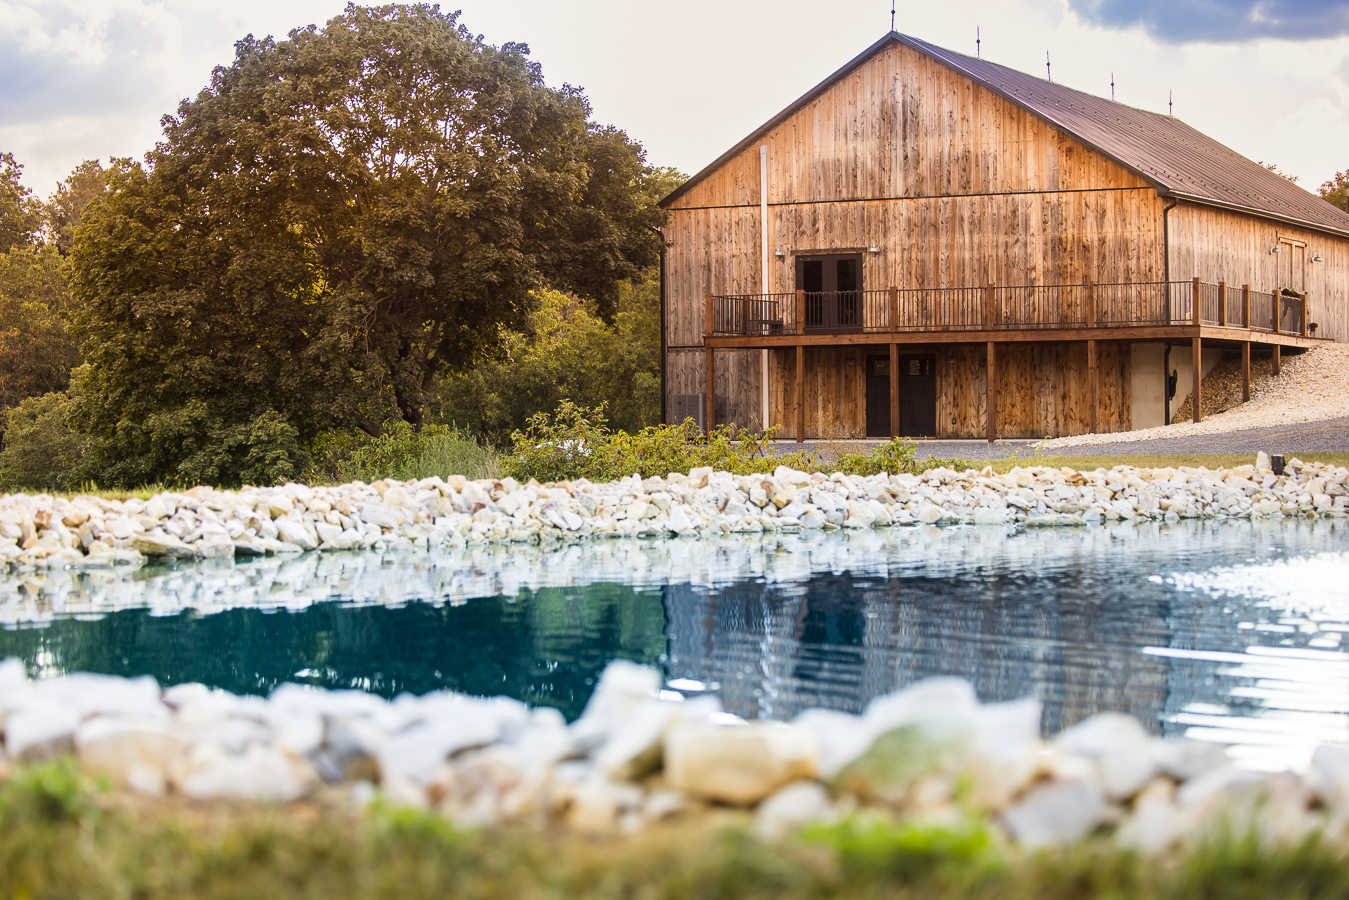 Alpine Acres is one Central PA Wedding Venues in Warfordsburg, PA. This venue features a rustic barn, stunning pond with a waterfall and gorgeous sunsets